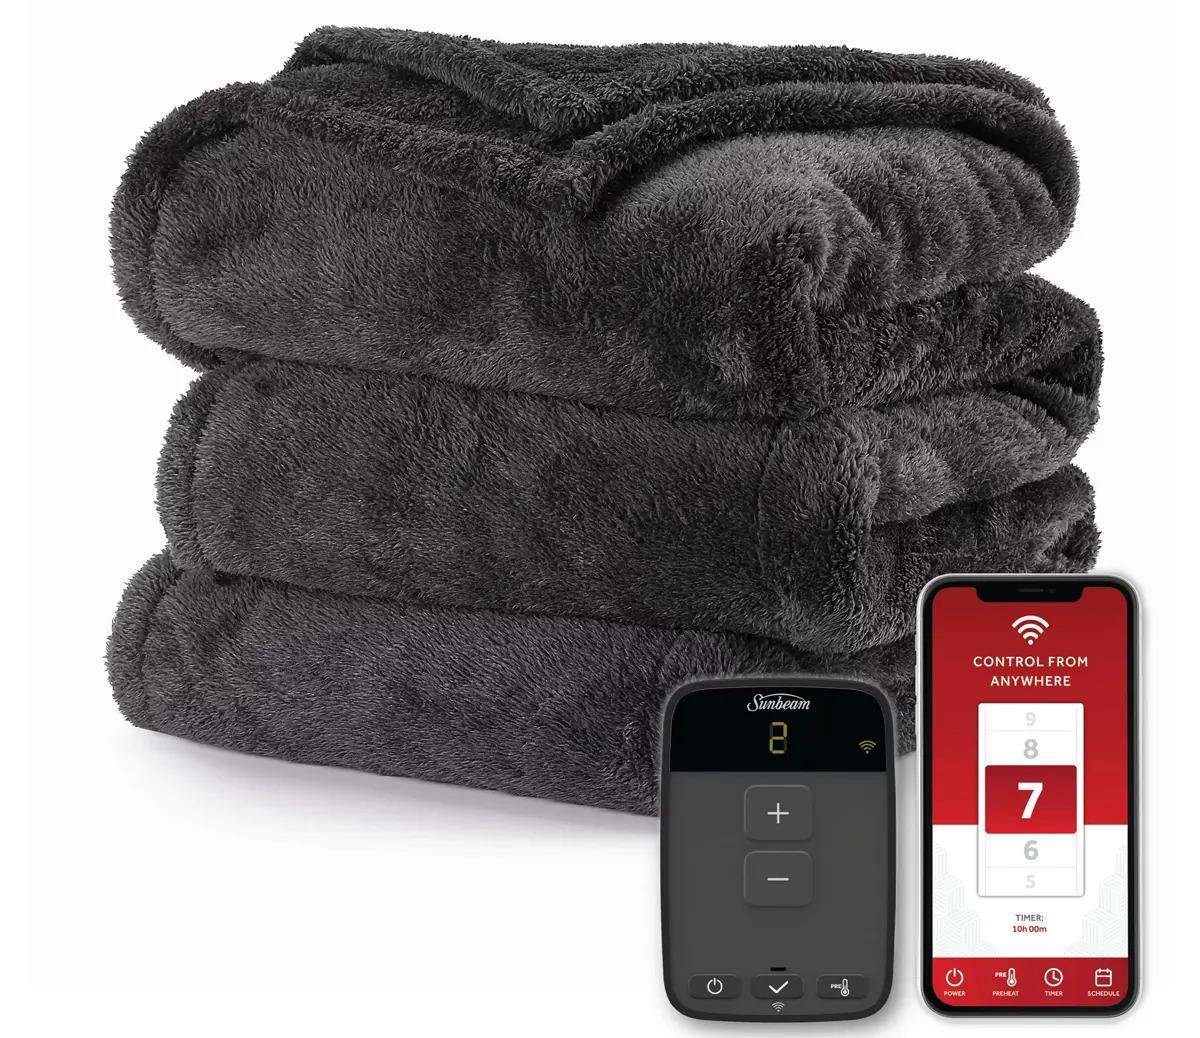 Sunbeam Connected WiFi Heated Electric Blanket for $16.60